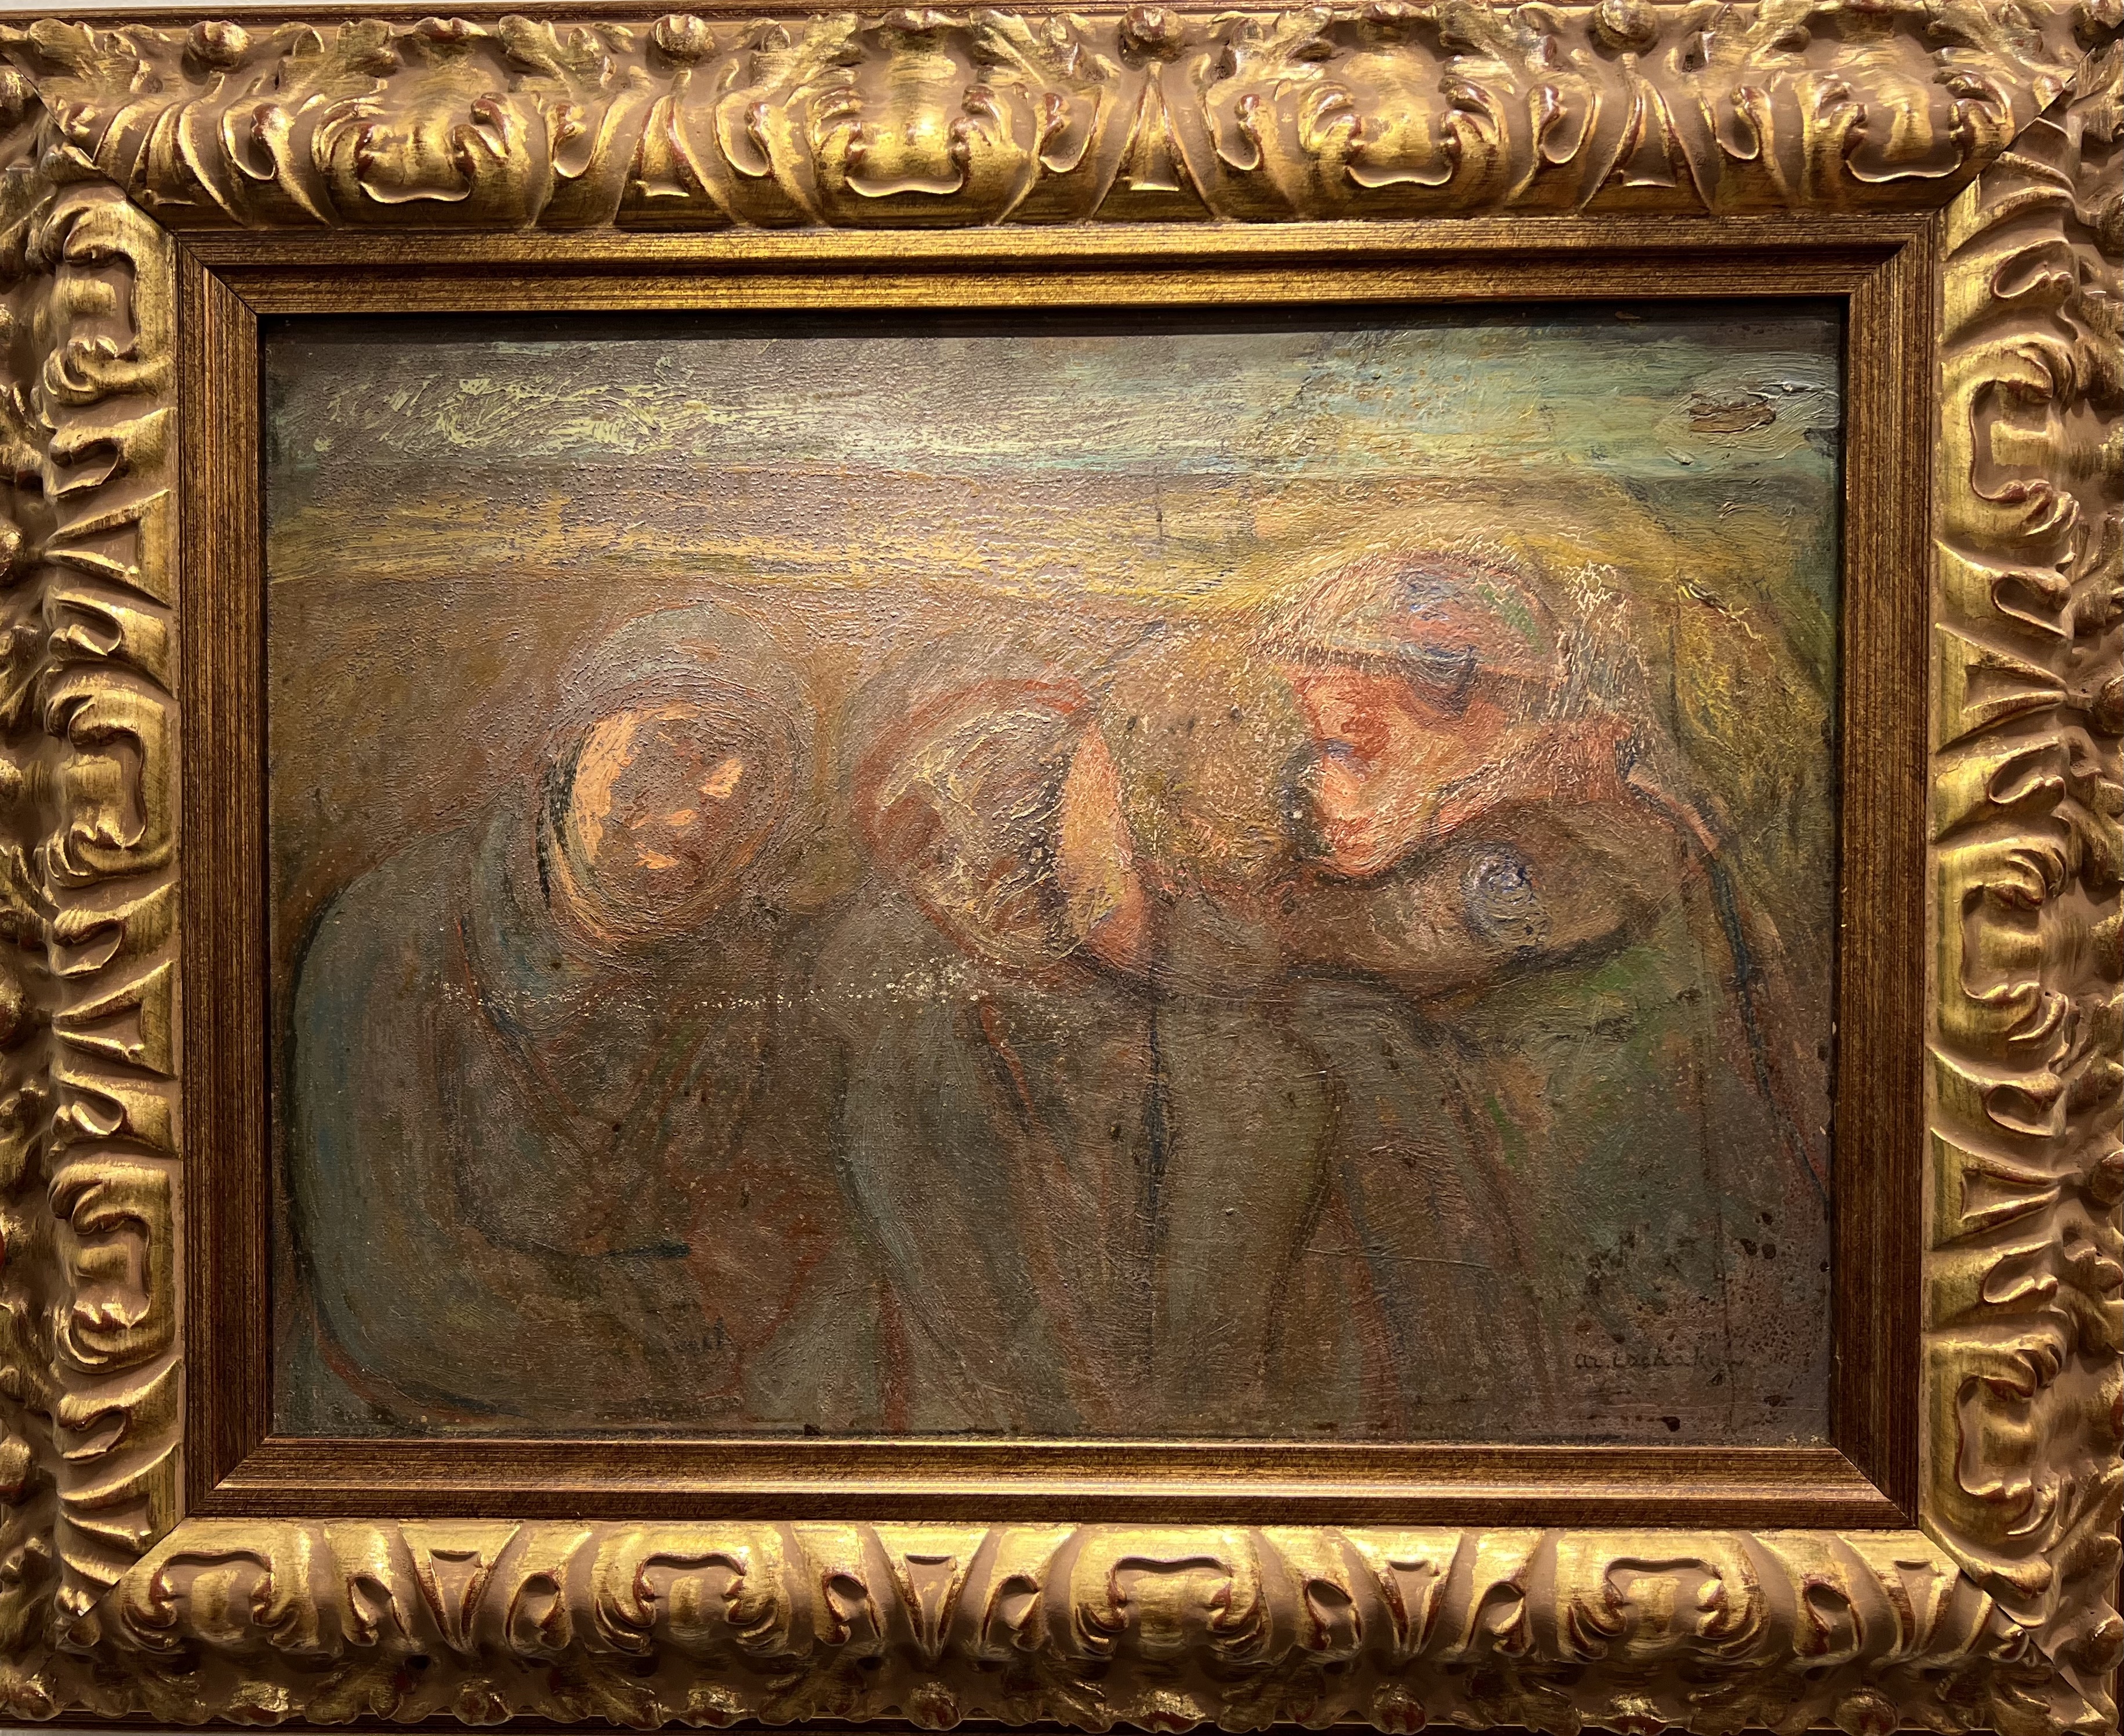 Ornate gold frame containing an impressionist painting showing blurred figures possibly in an embrace.